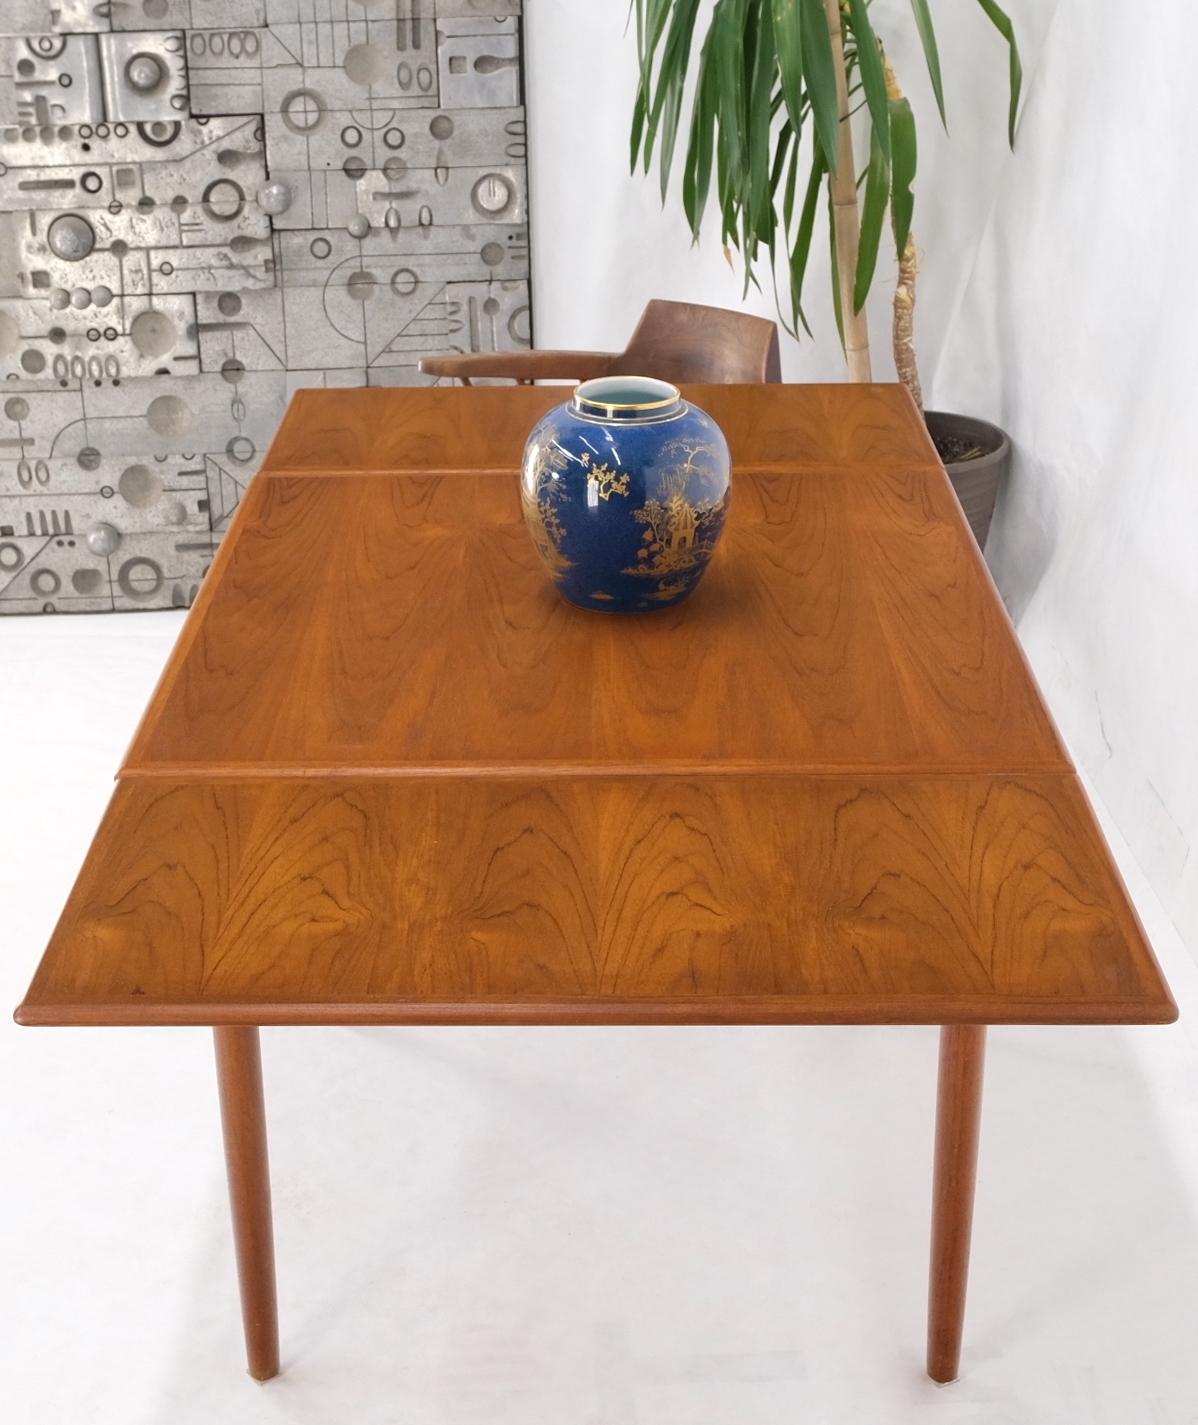 20th Century Danish Mid-Century Modern Square Teak Refectory Extension Boards Dining Table For Sale